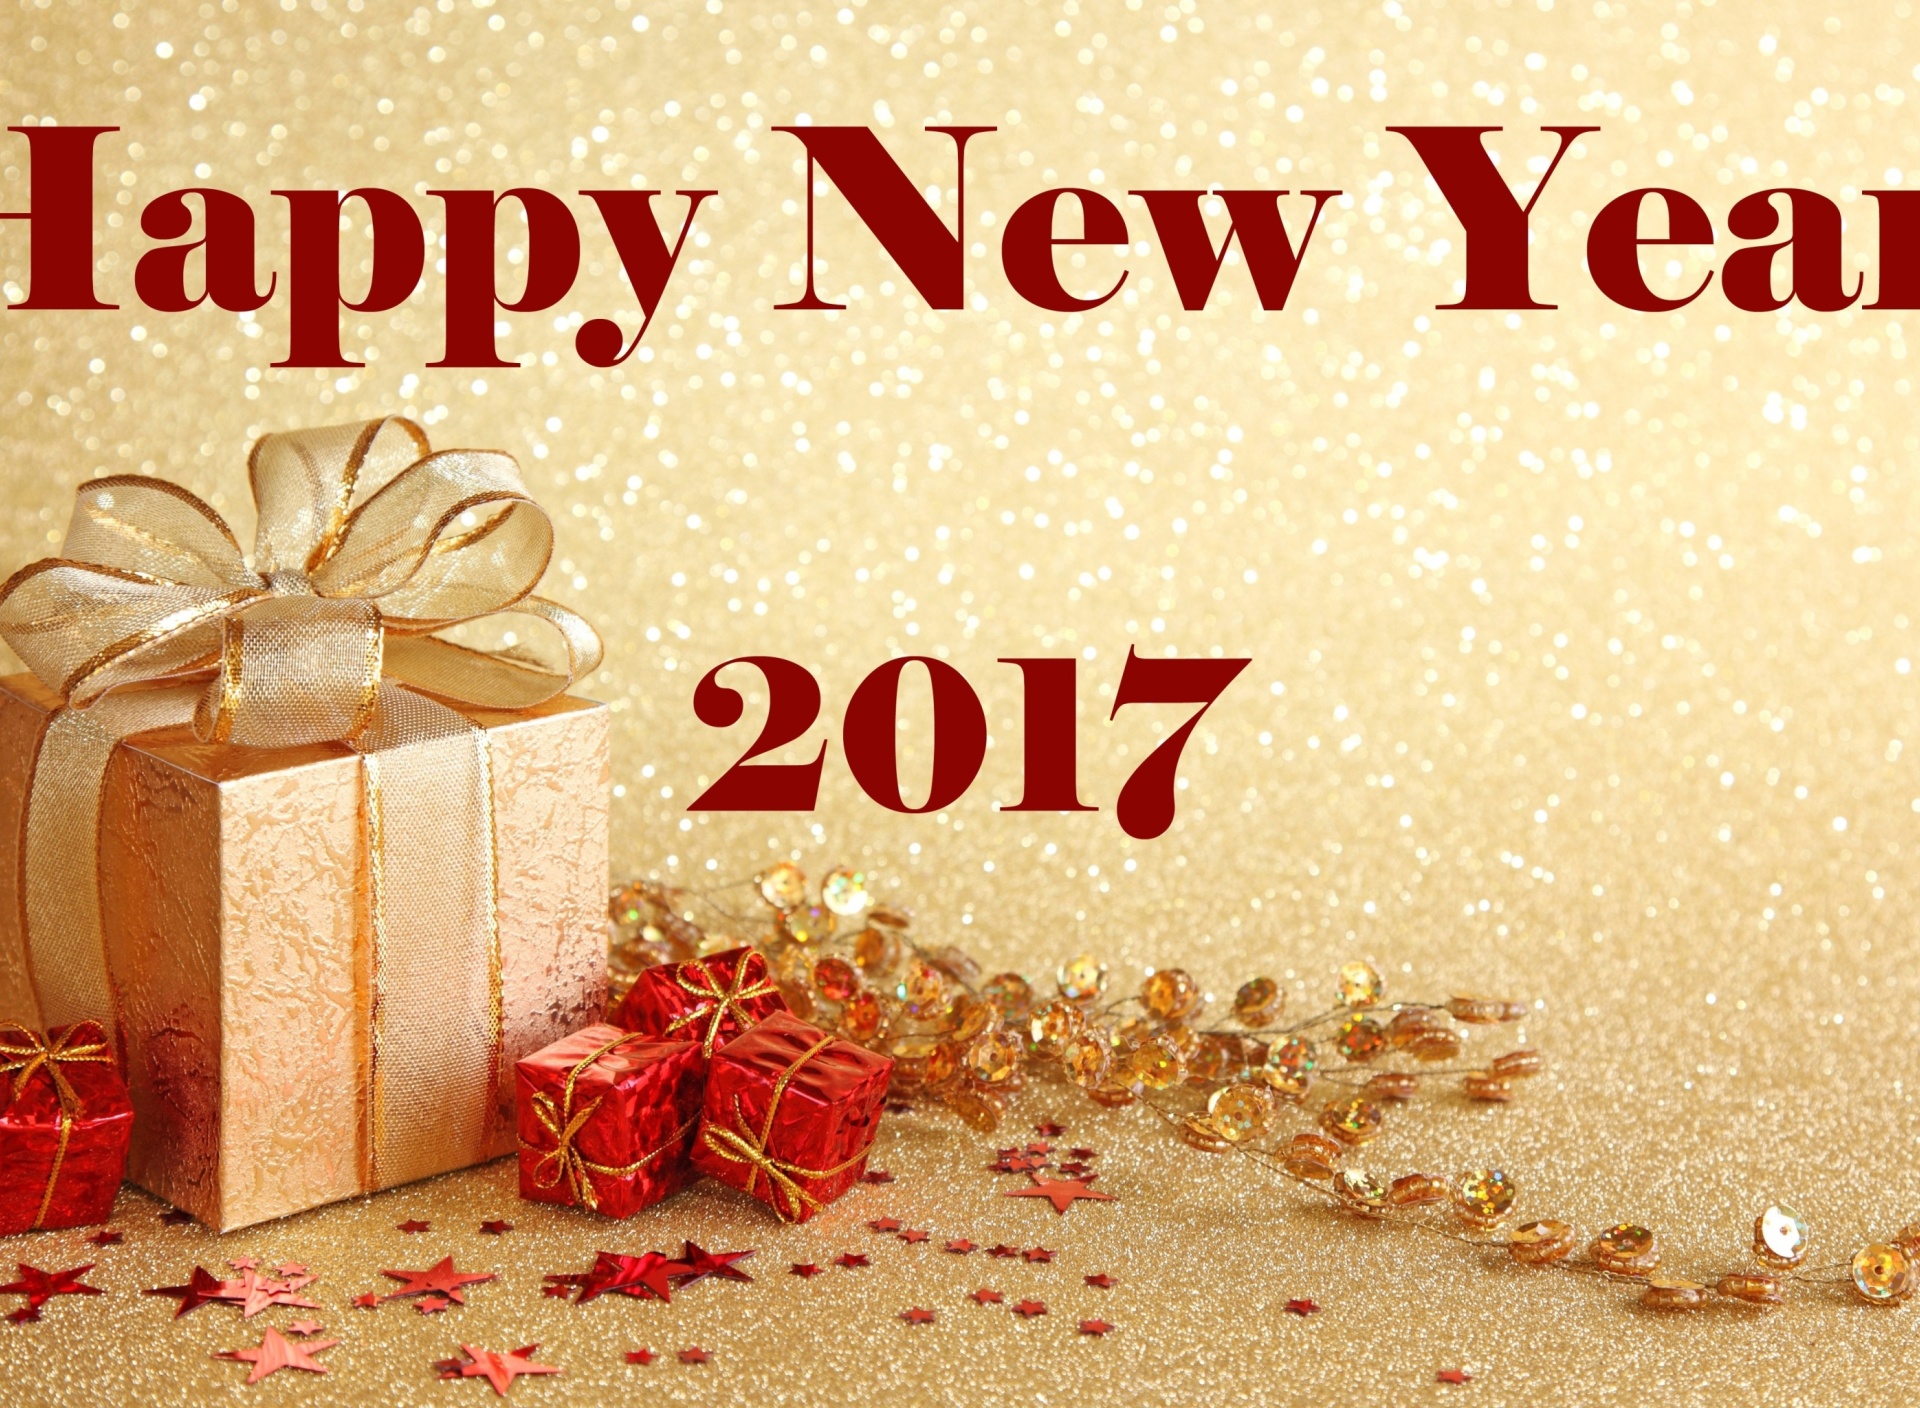 Das Happy New Year 2017 with Gifts Wallpaper 1920x1408